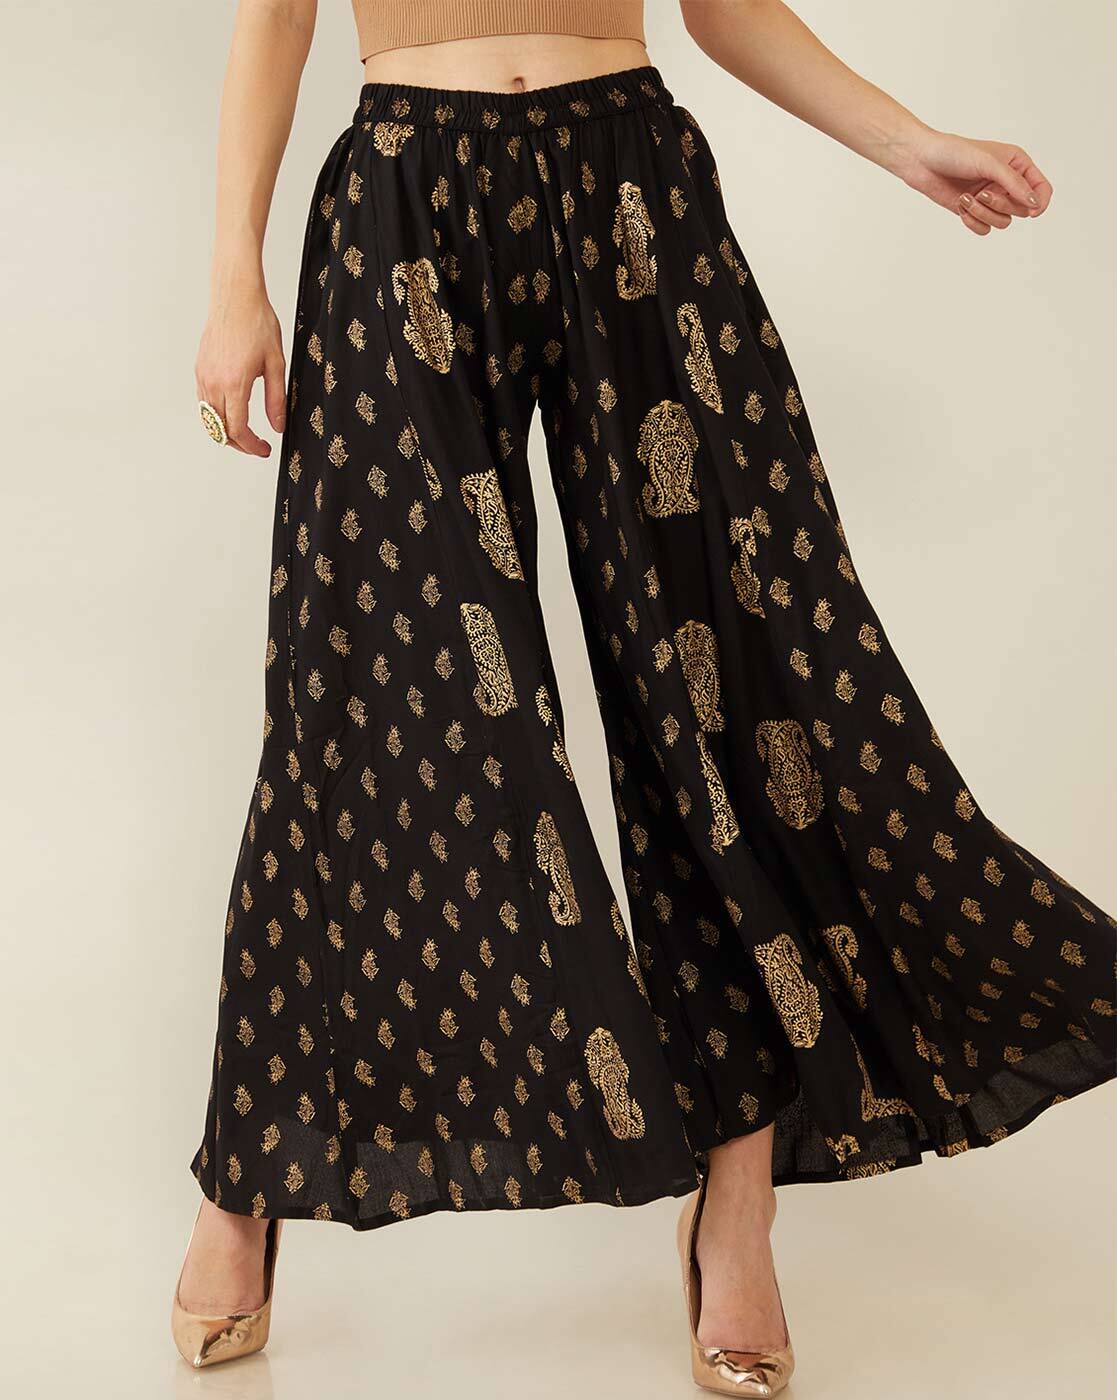 Cool baba wide pants tightened at the ankles by a smocked elastic at the  waist